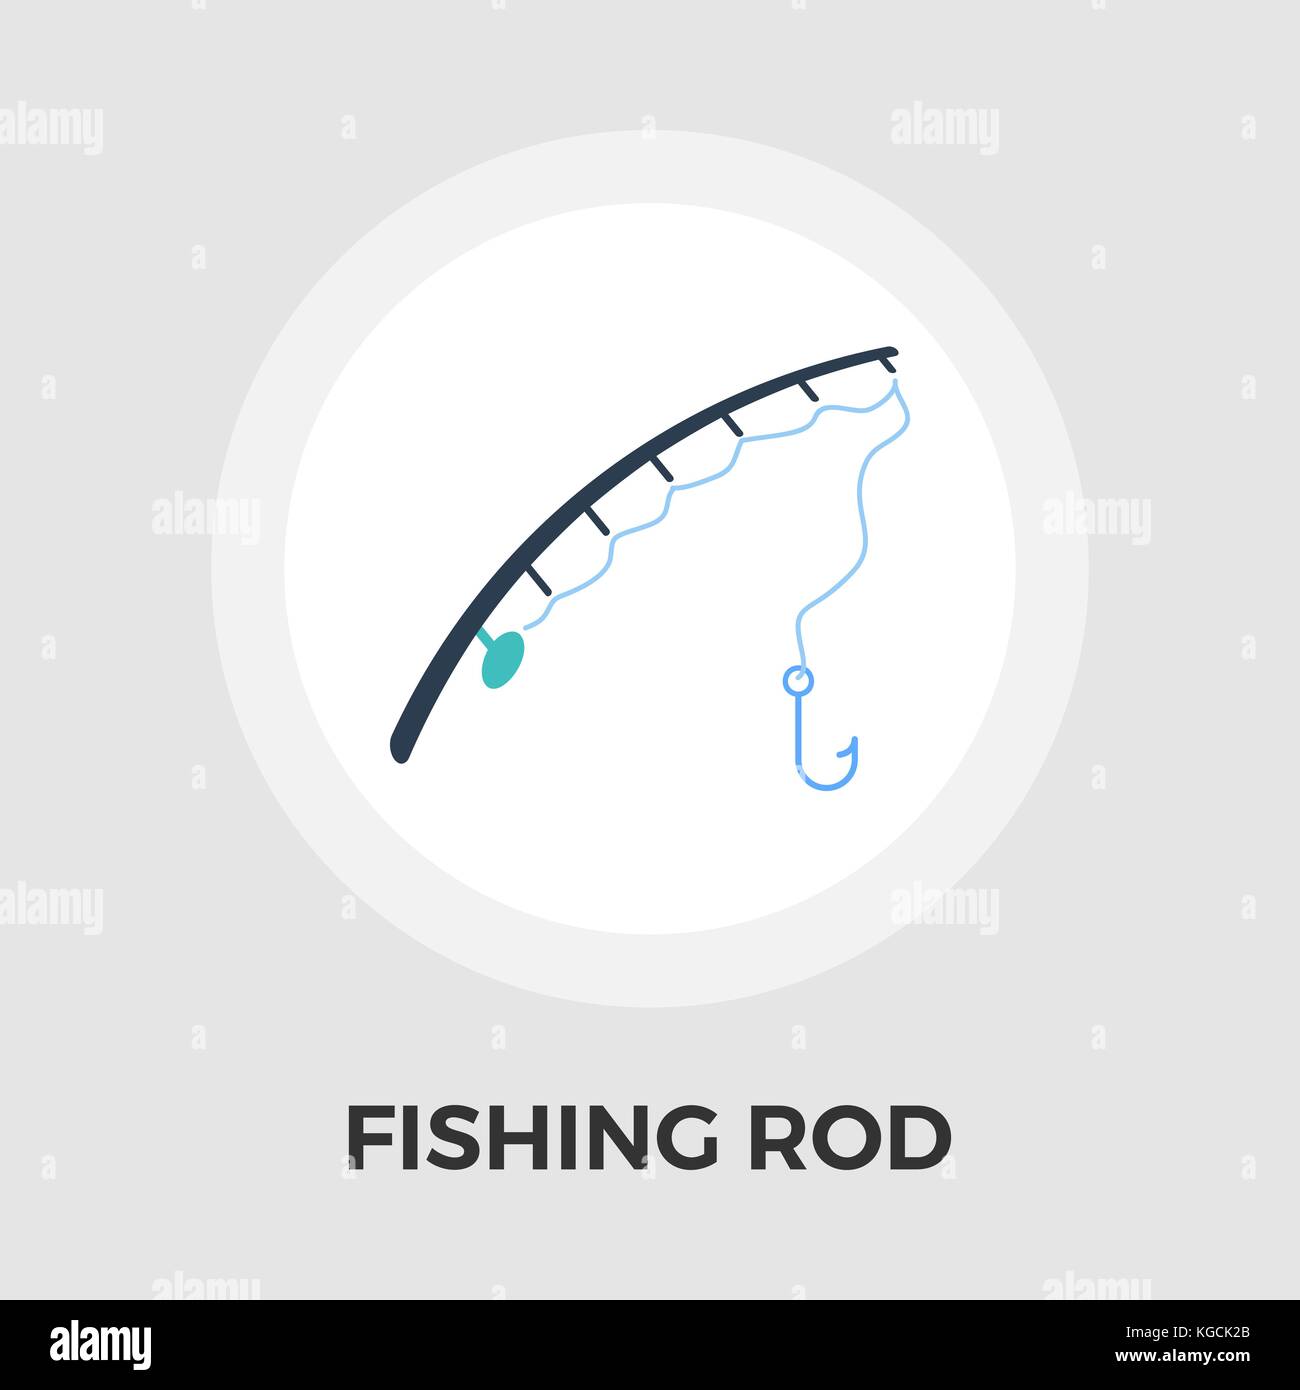 A Set Of Items For Fishing With Nets And A Fishing Rod Vector Illustrations  Of Isolated Items For Catching Sea Animals Fishing Rod Floats Nets Camping  Knife Matches Lantern Spinning Thermos Camping